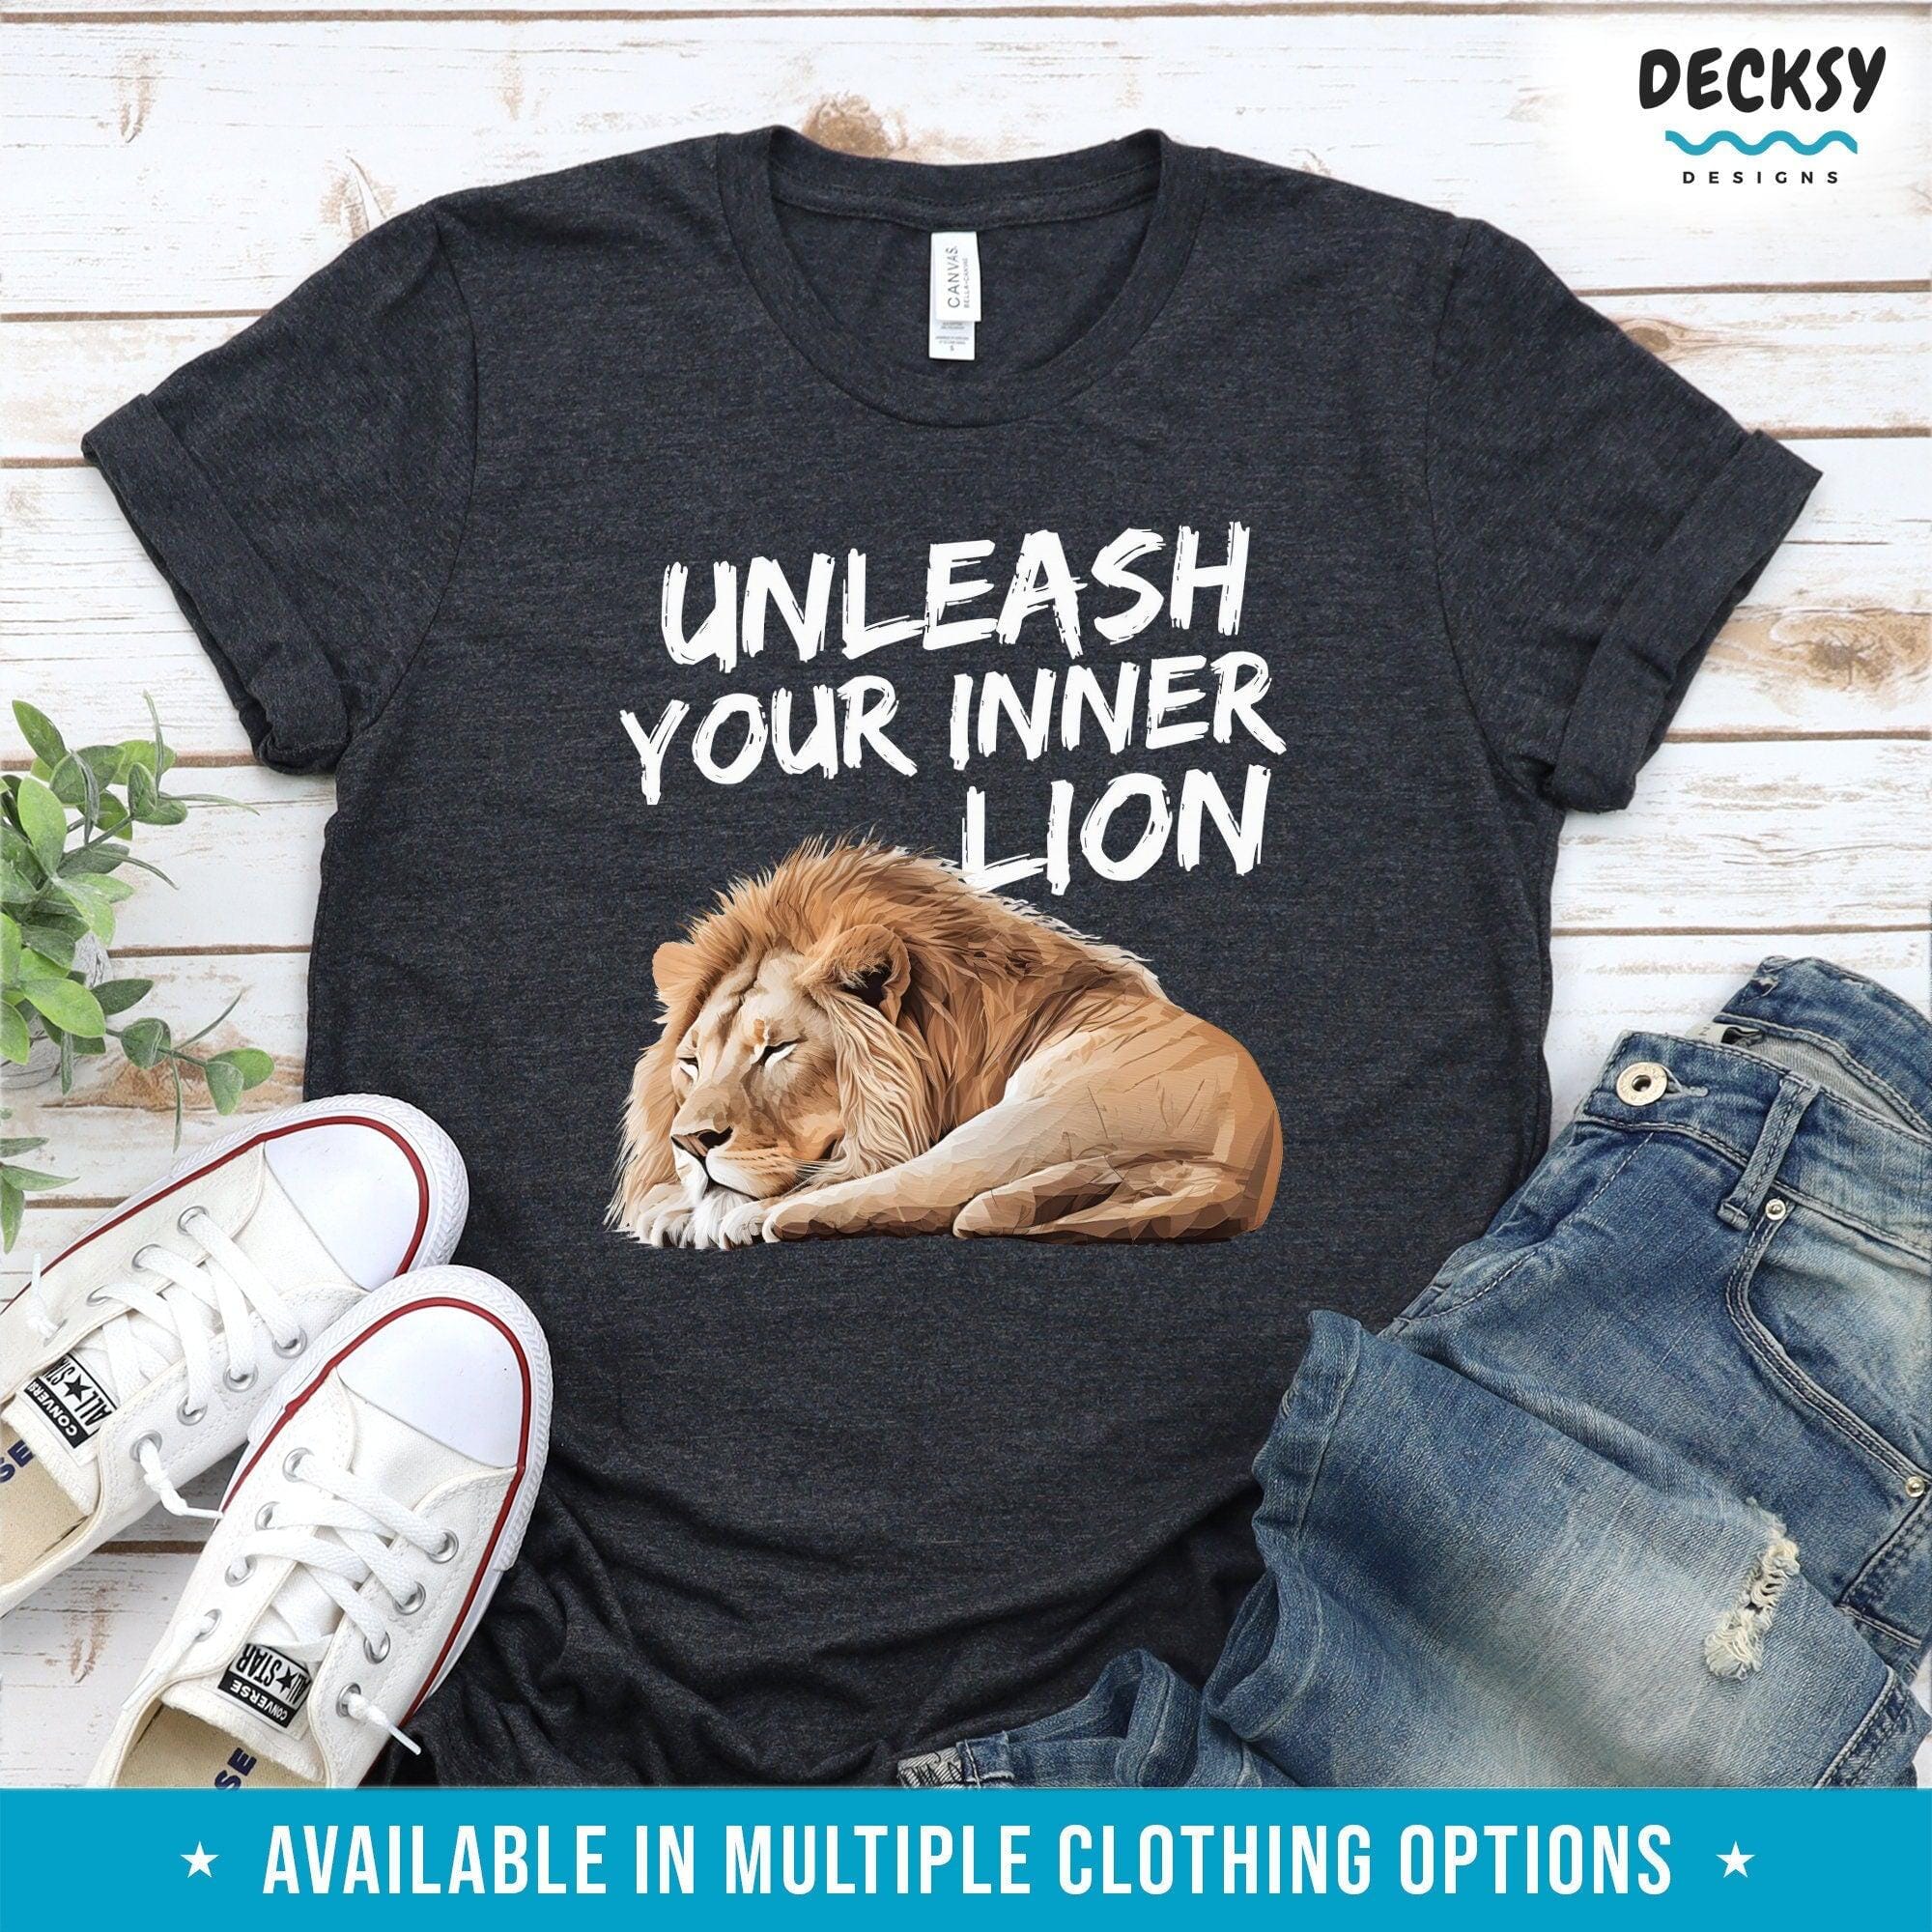 Motivational Lion Shirt, Sarcastic Gift-Clothing:Gender-Neutral Adult Clothing:Tops & Tees:T-shirts:Graphic Tees-DecksyDesigns